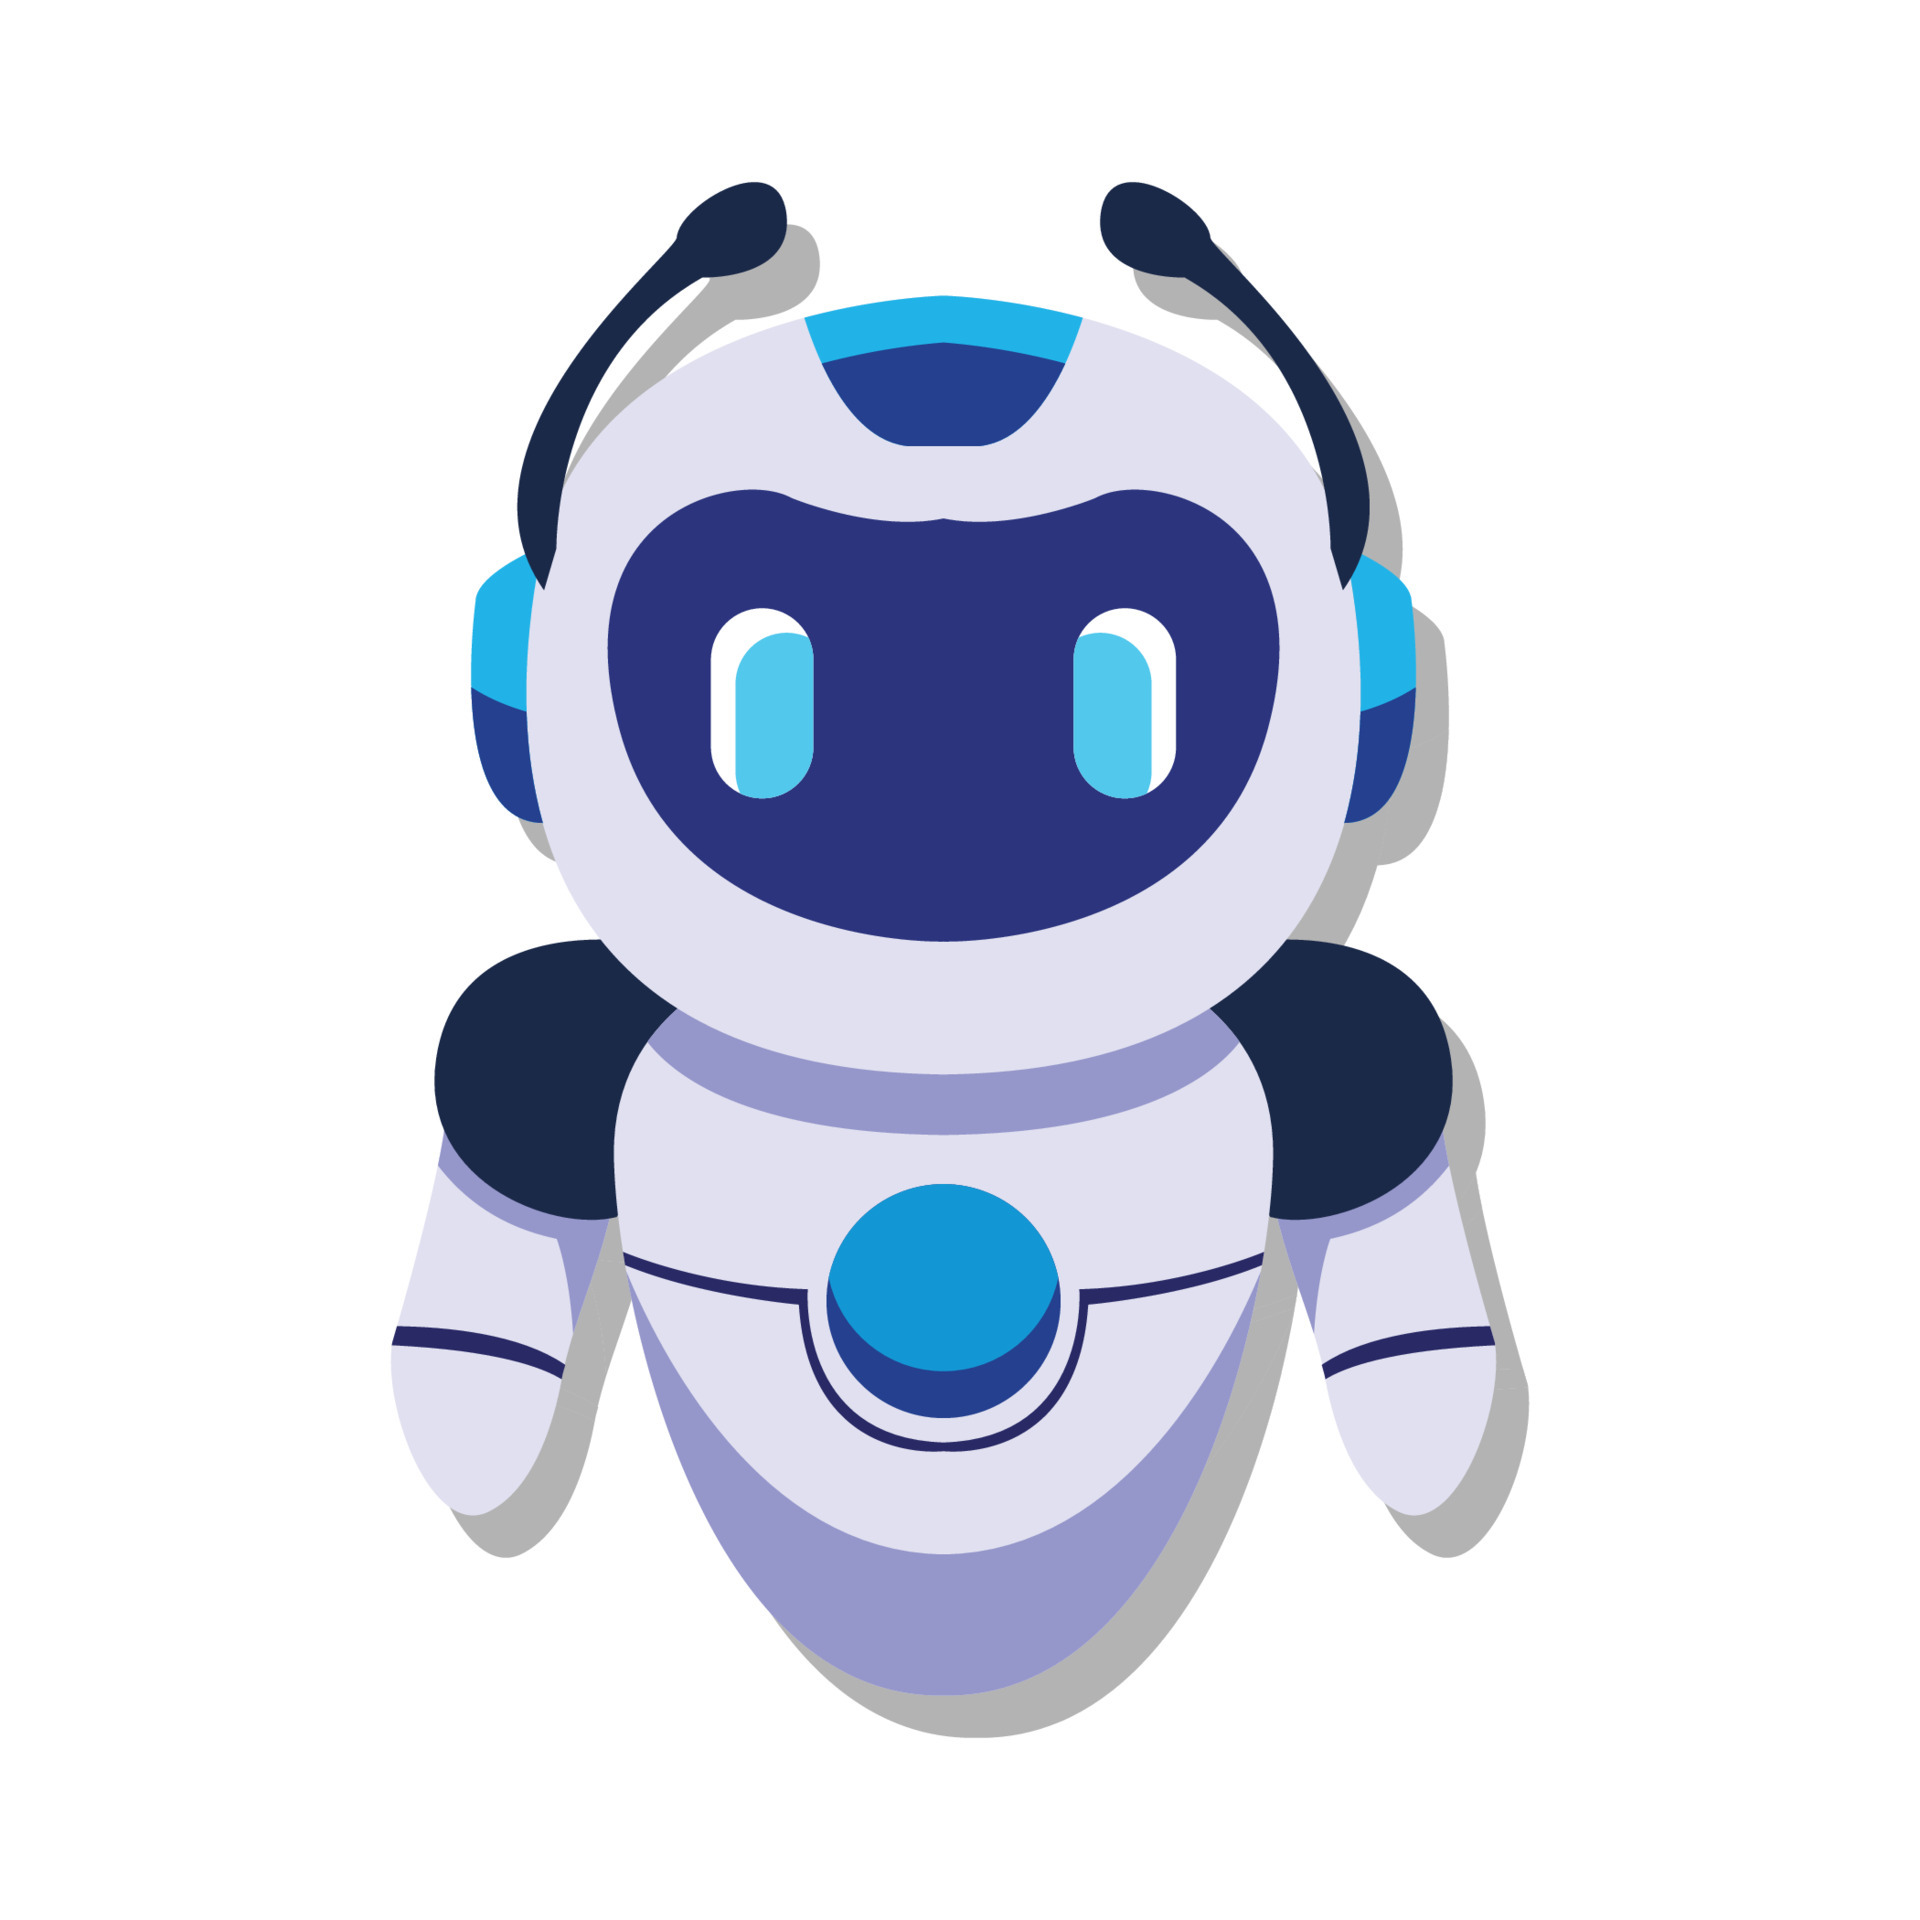 robot-chatbot-icon-sign-free-vector.jpg